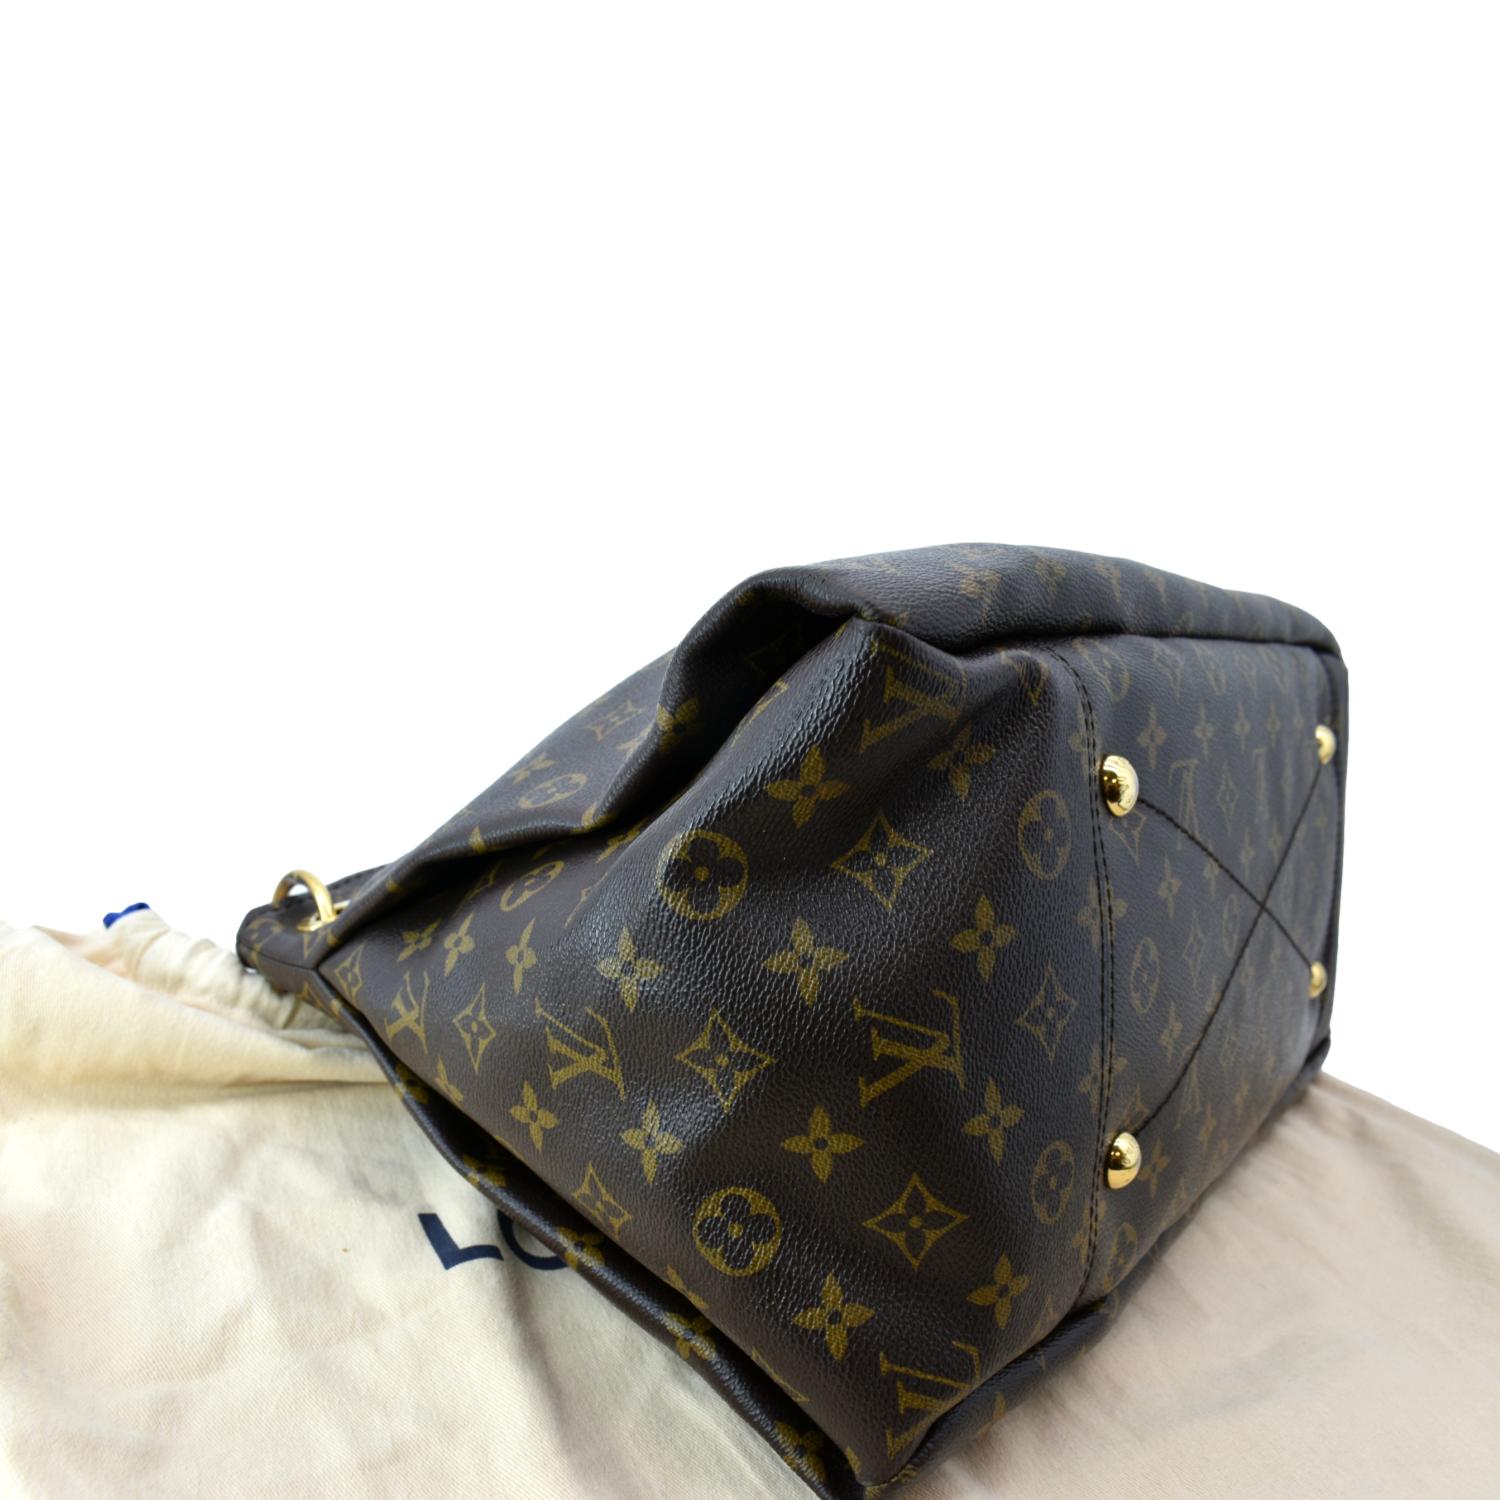 Archived Dreams® on Instagram: “Varsity made from vintage Louis Vuitton  bags Via @lonedabiri”